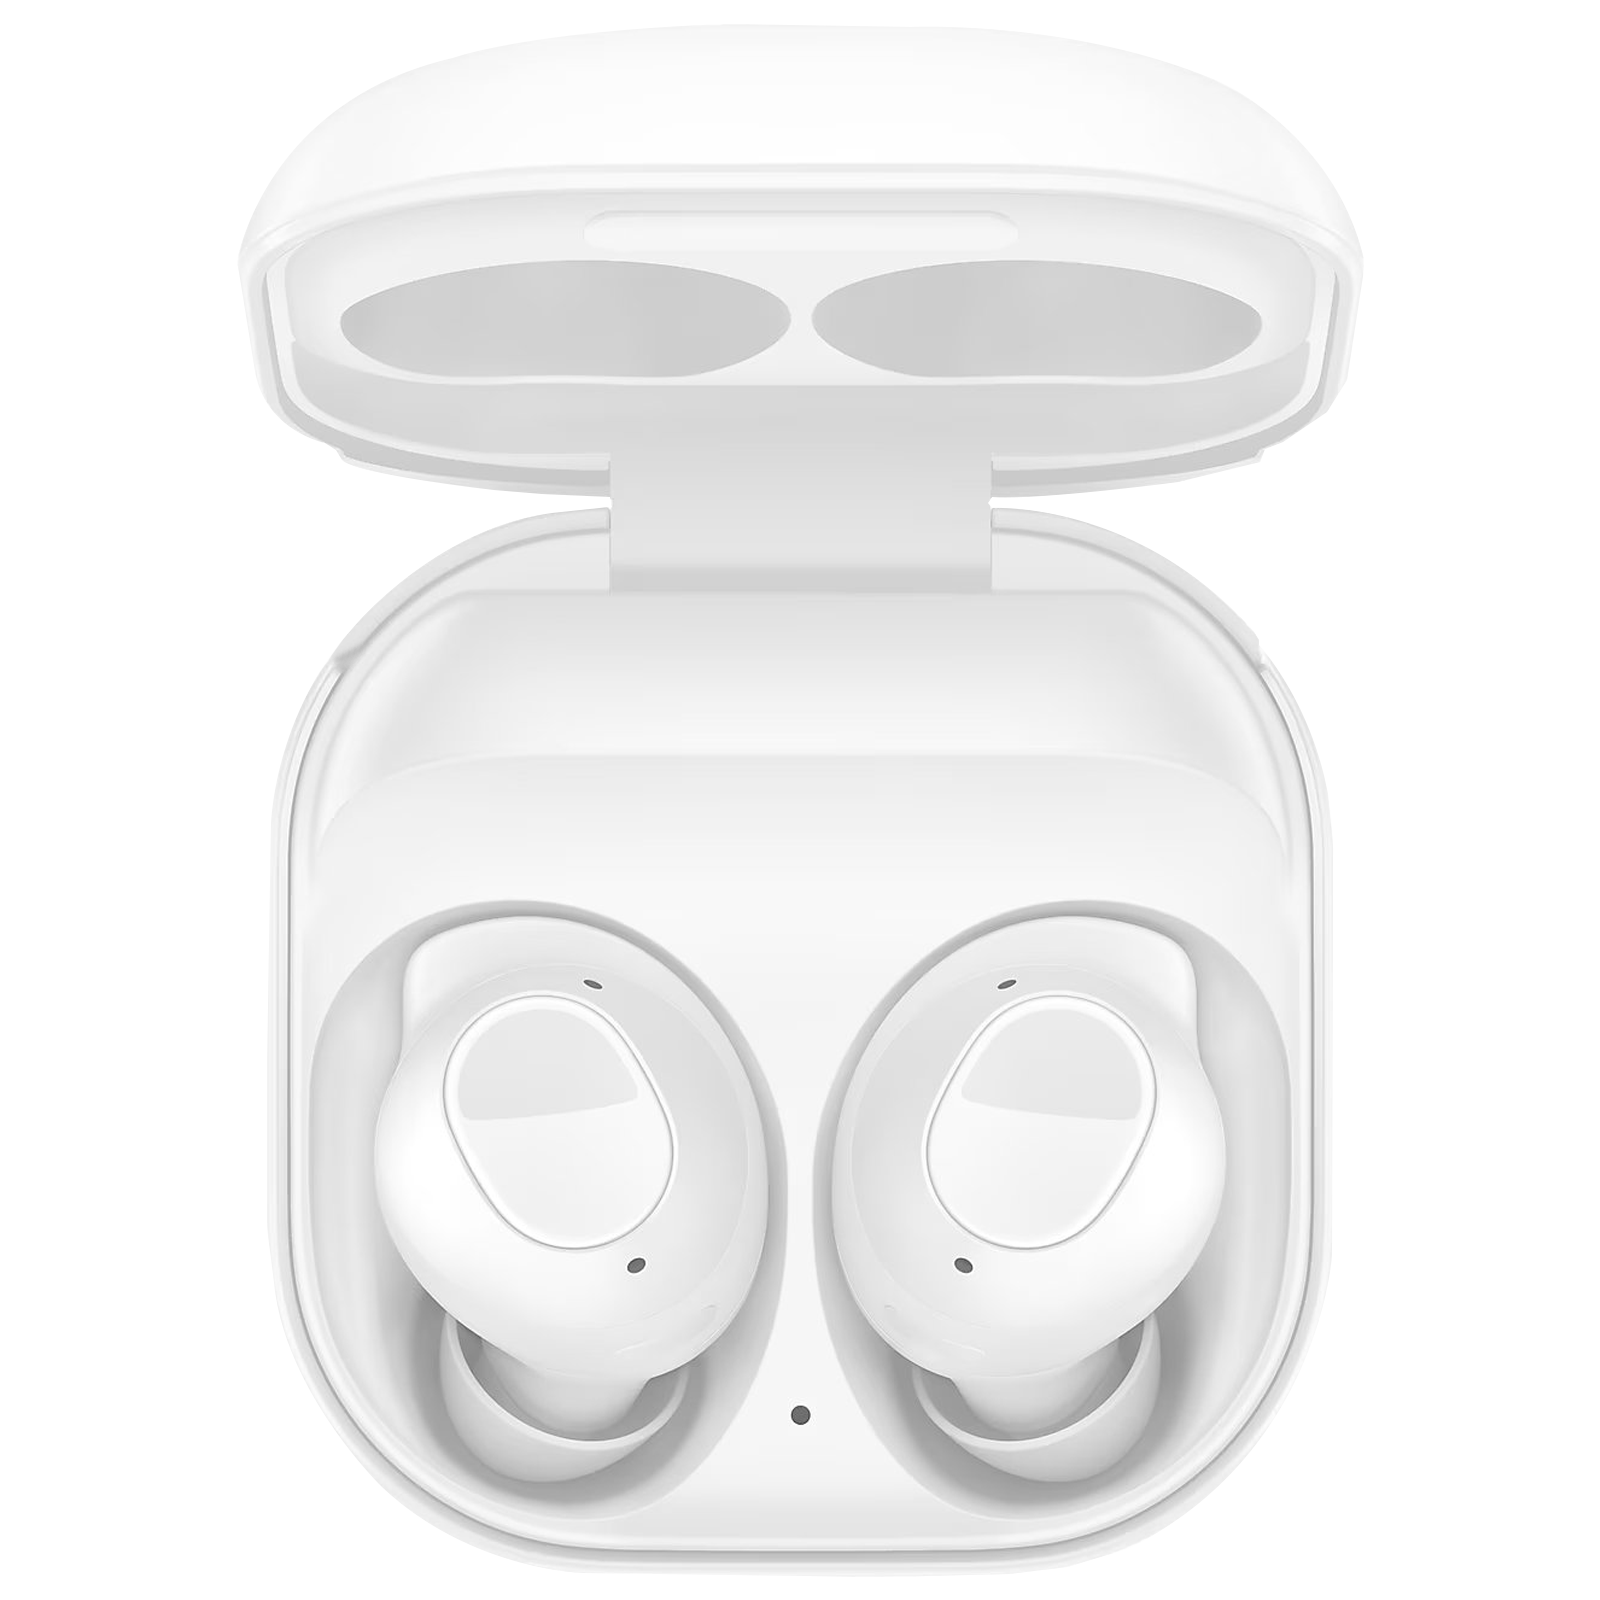 SAMSUNG Galaxy Buds FE SM-R400NZWA TWS Earbuds with Active Noise Cancellation (Ambient Sound Mode, Mystic White)